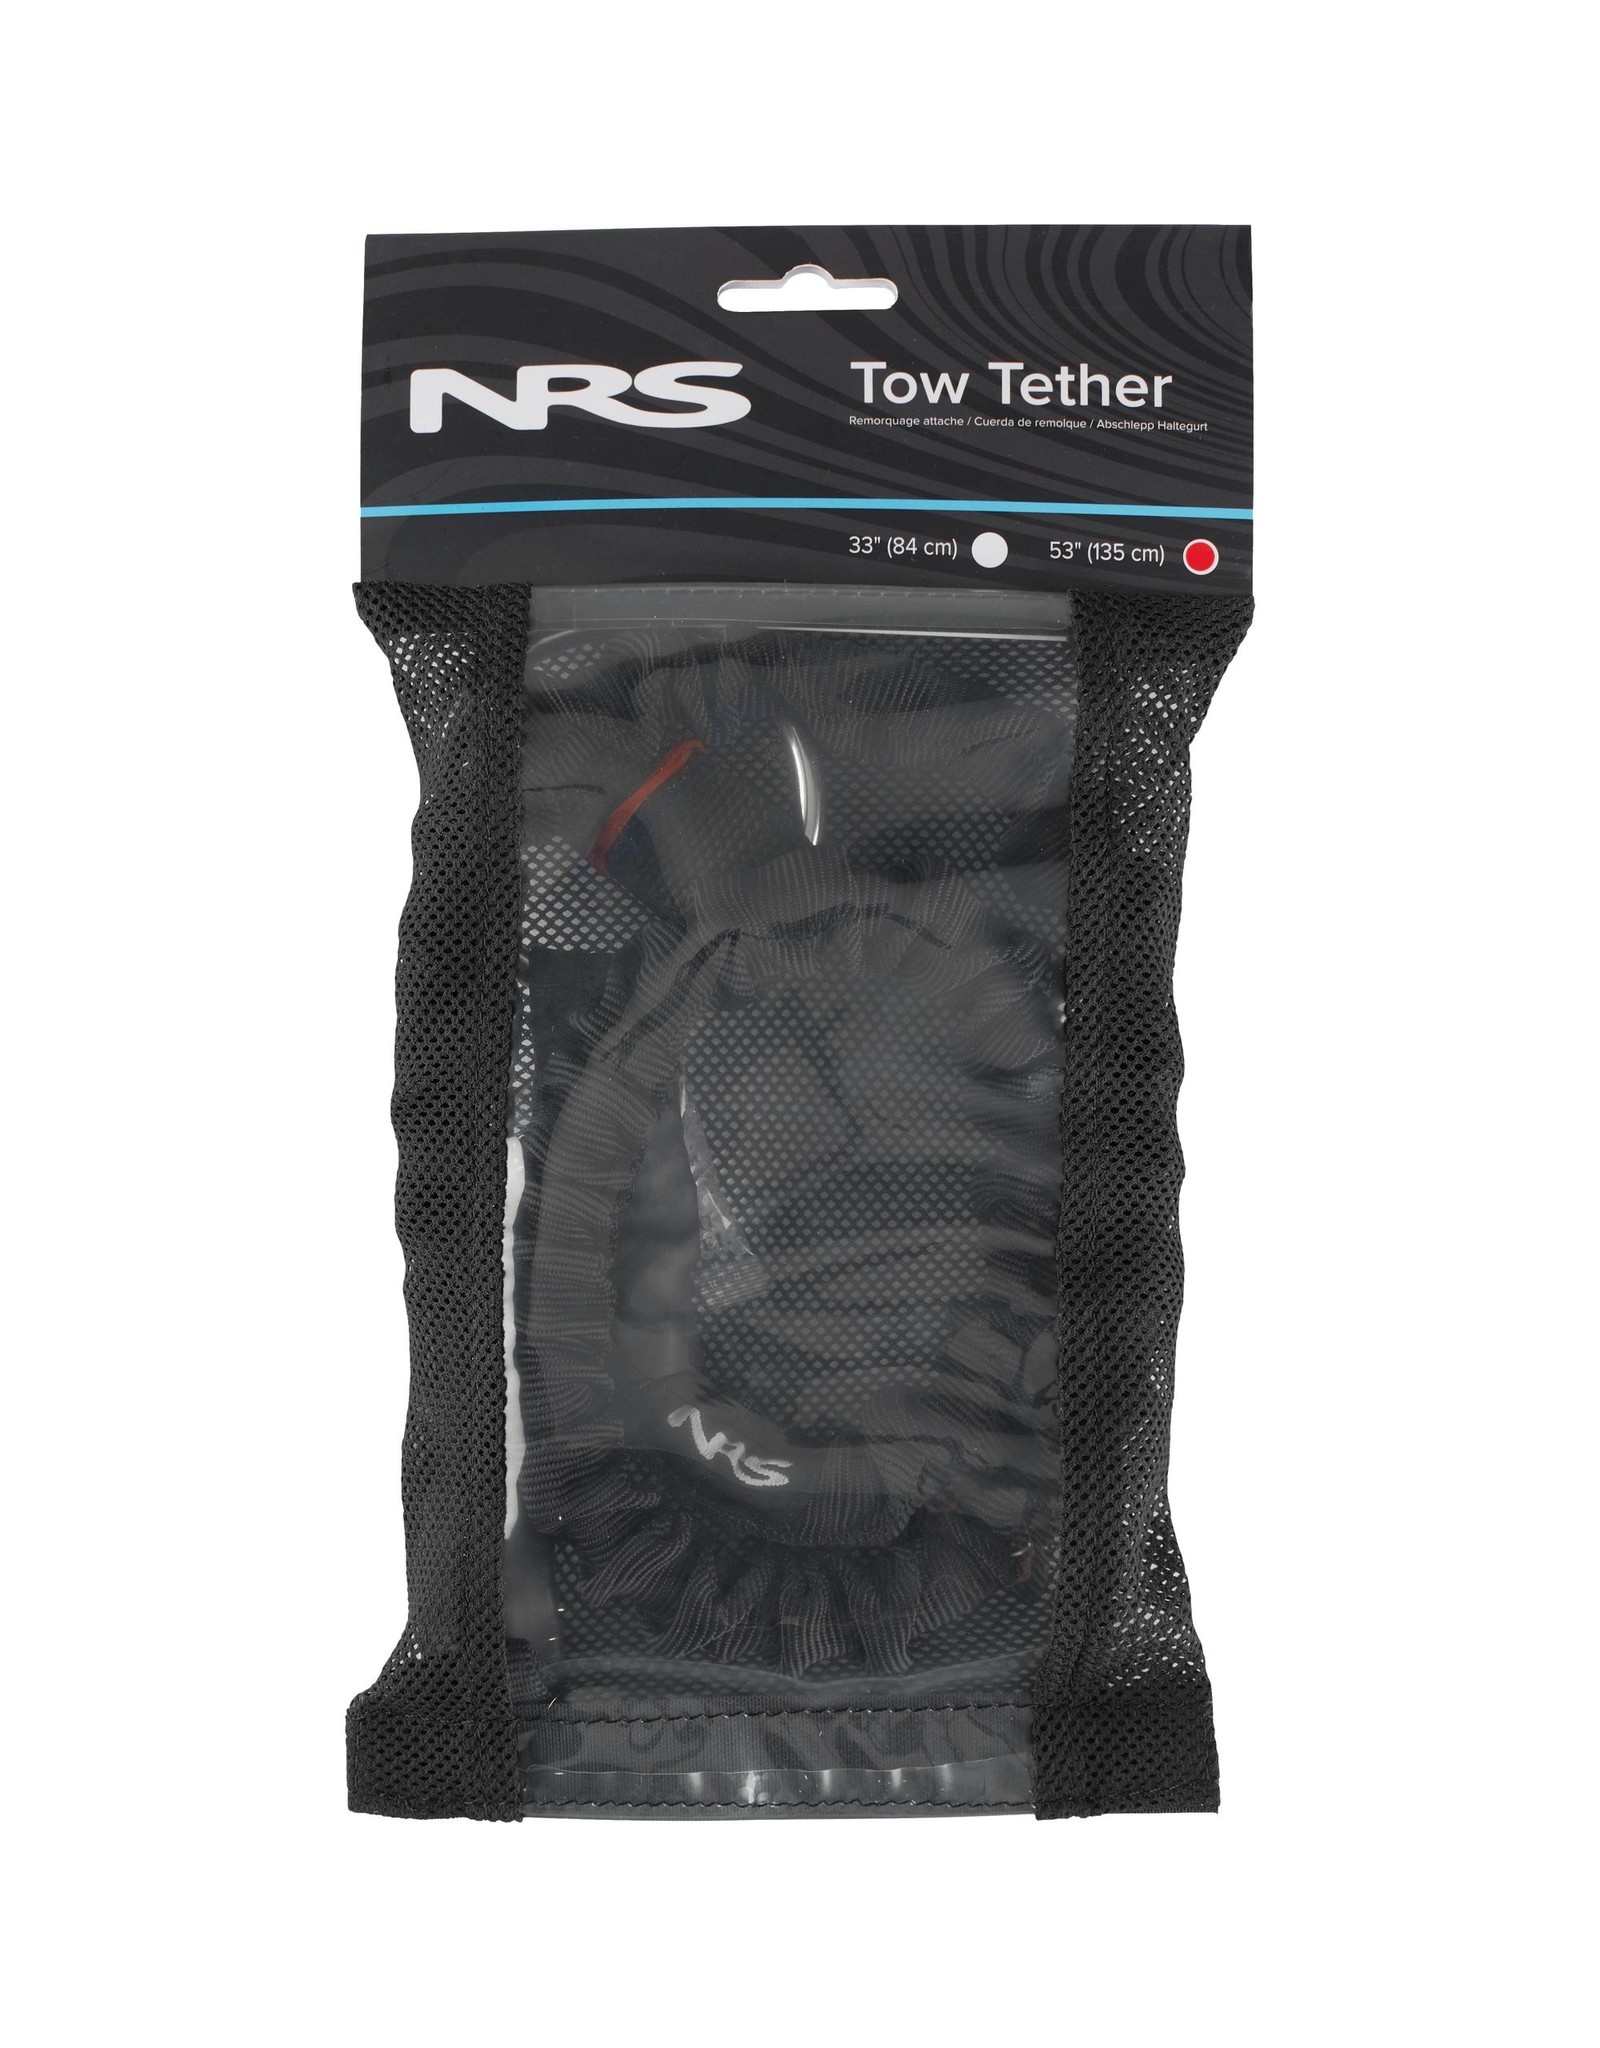 NRS NRS Tow Tether  53" no carabiner